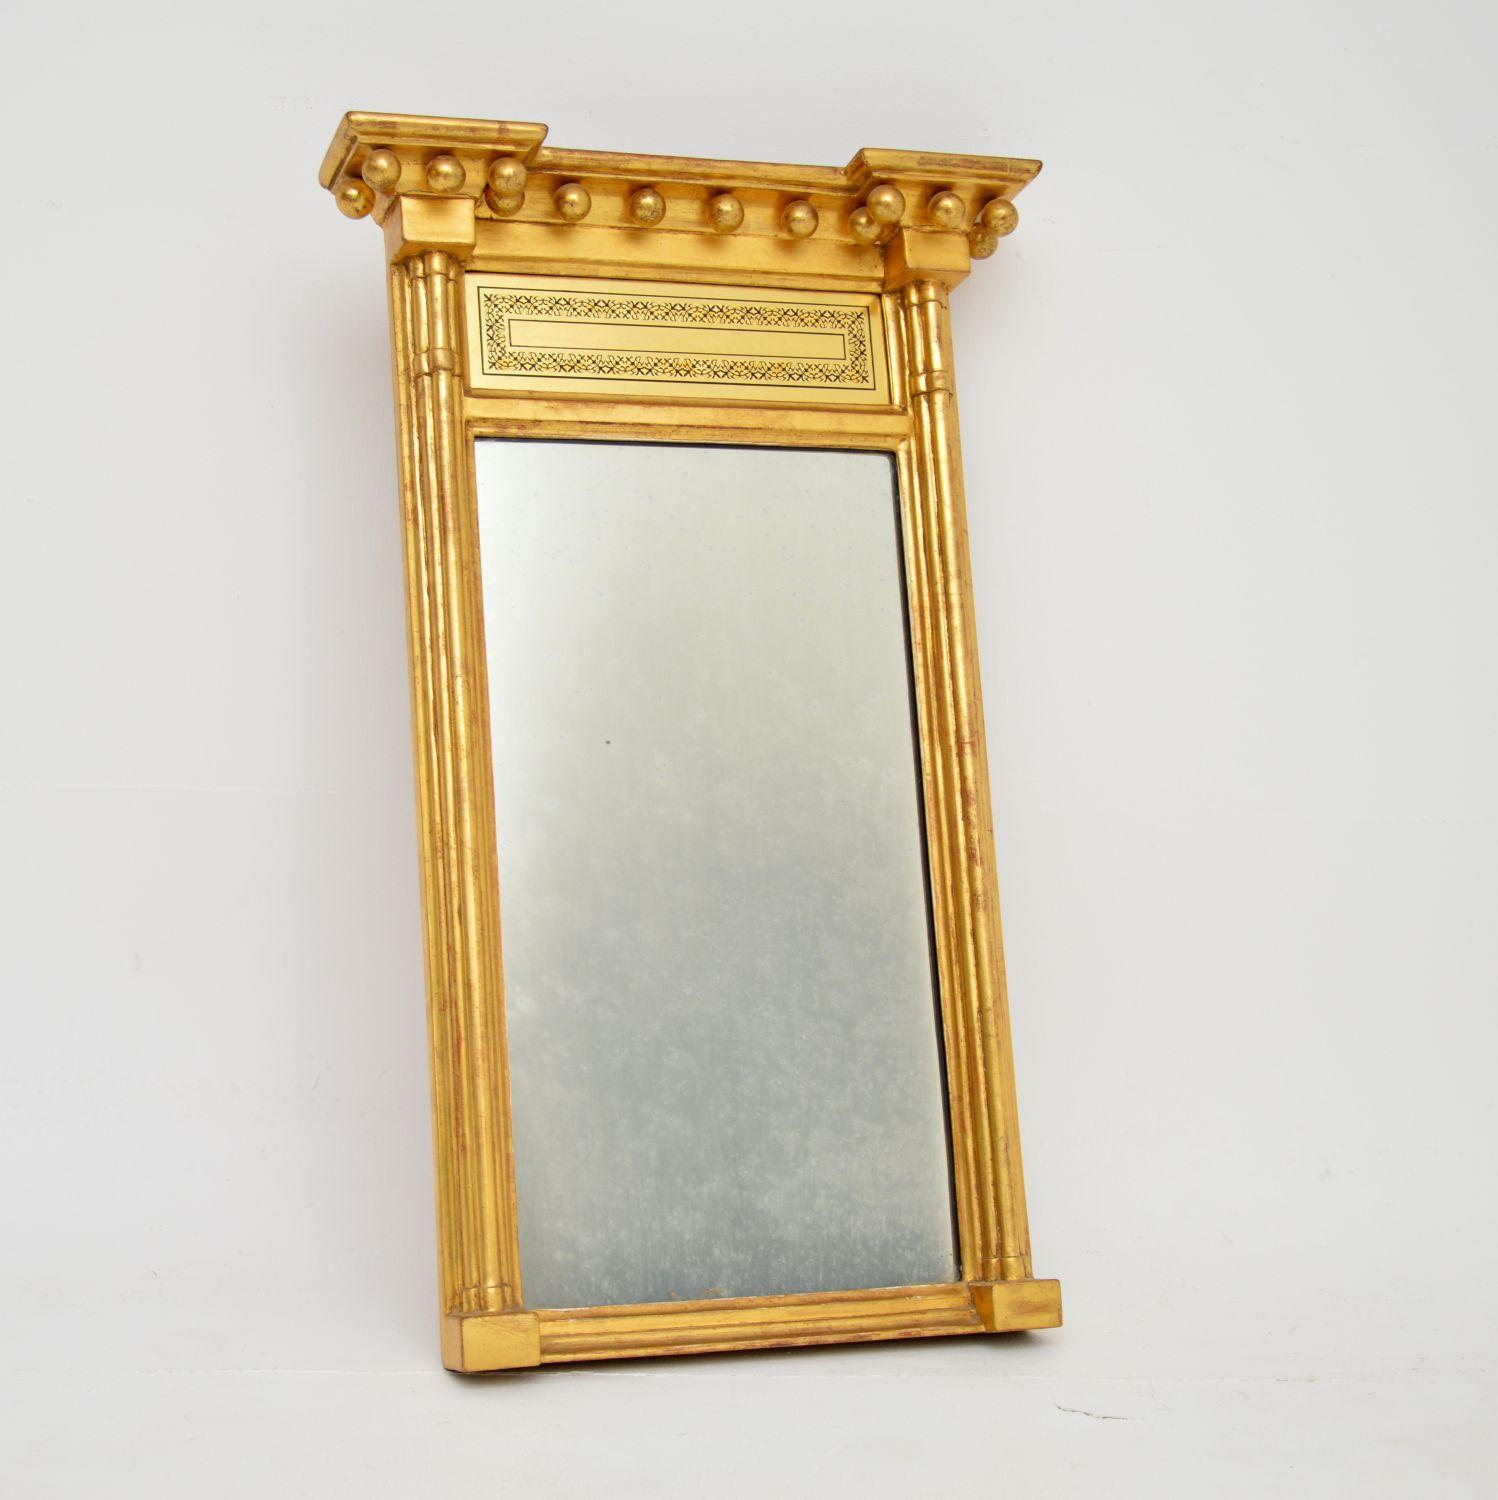 A rare & small original George III period gilt wood mirror in the neoclassical style. This was made in England & I would date it from around the 1790-1810 period.

It is of extremely fine quality and is a lovely size. The cornice is beautifully